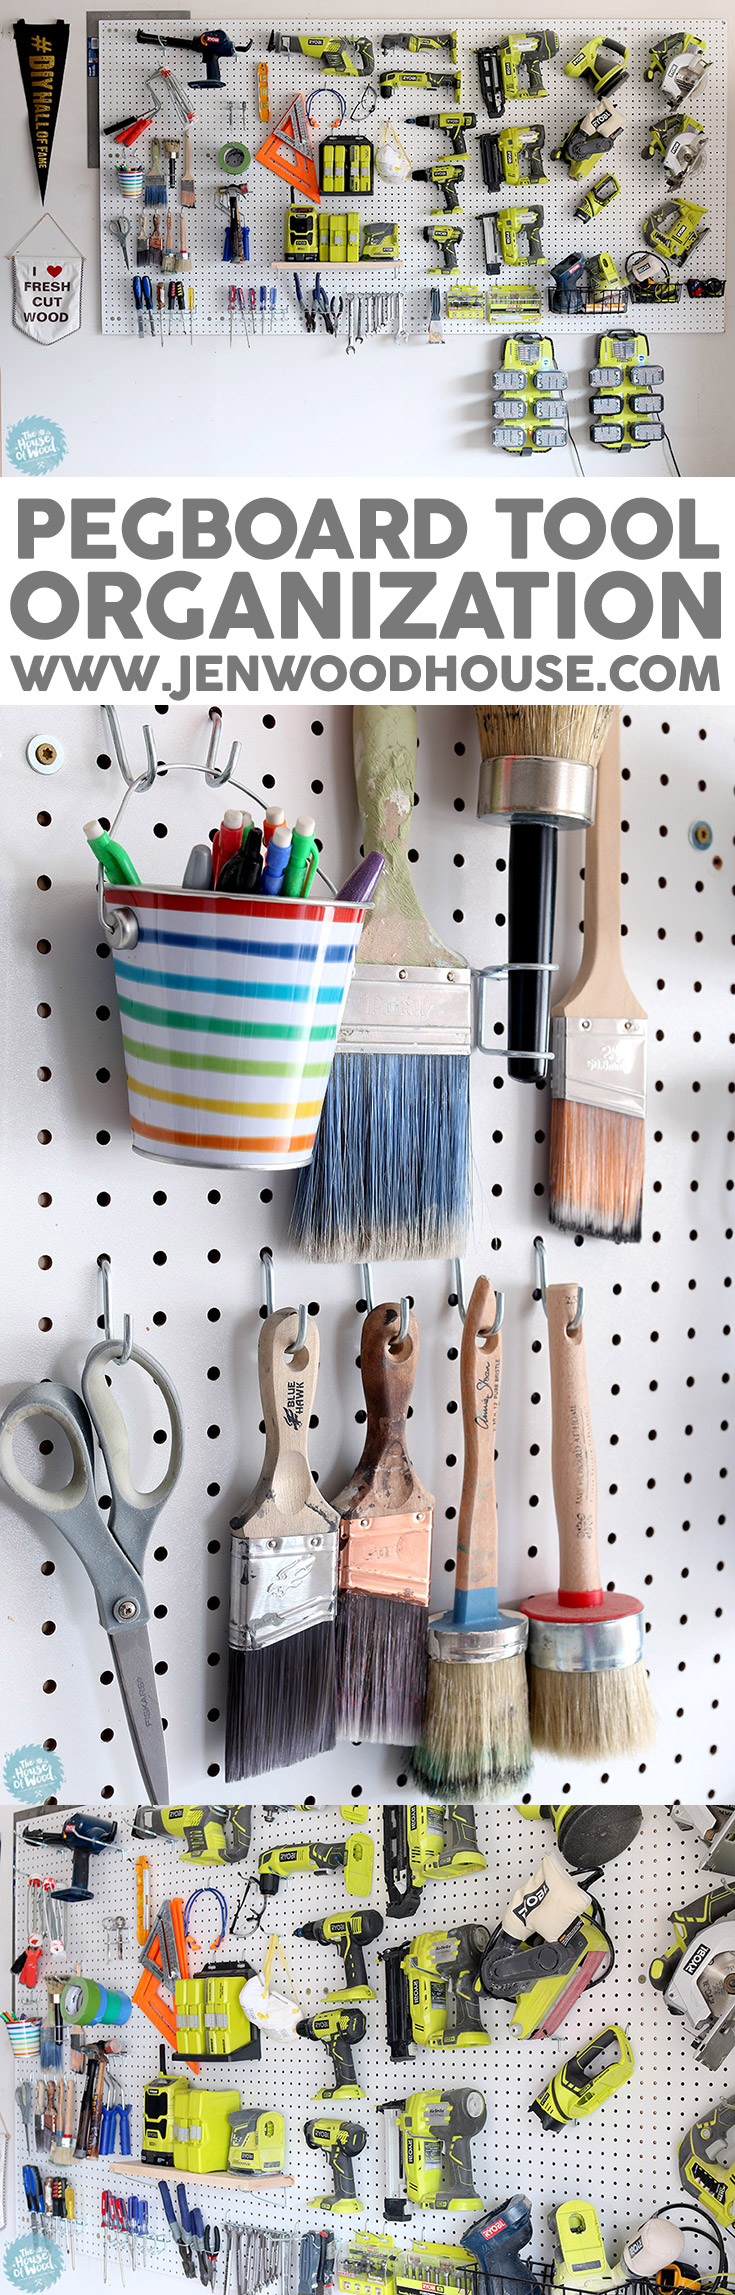 How to organize the tools in your garage using pegboard via Jen Woodhouse